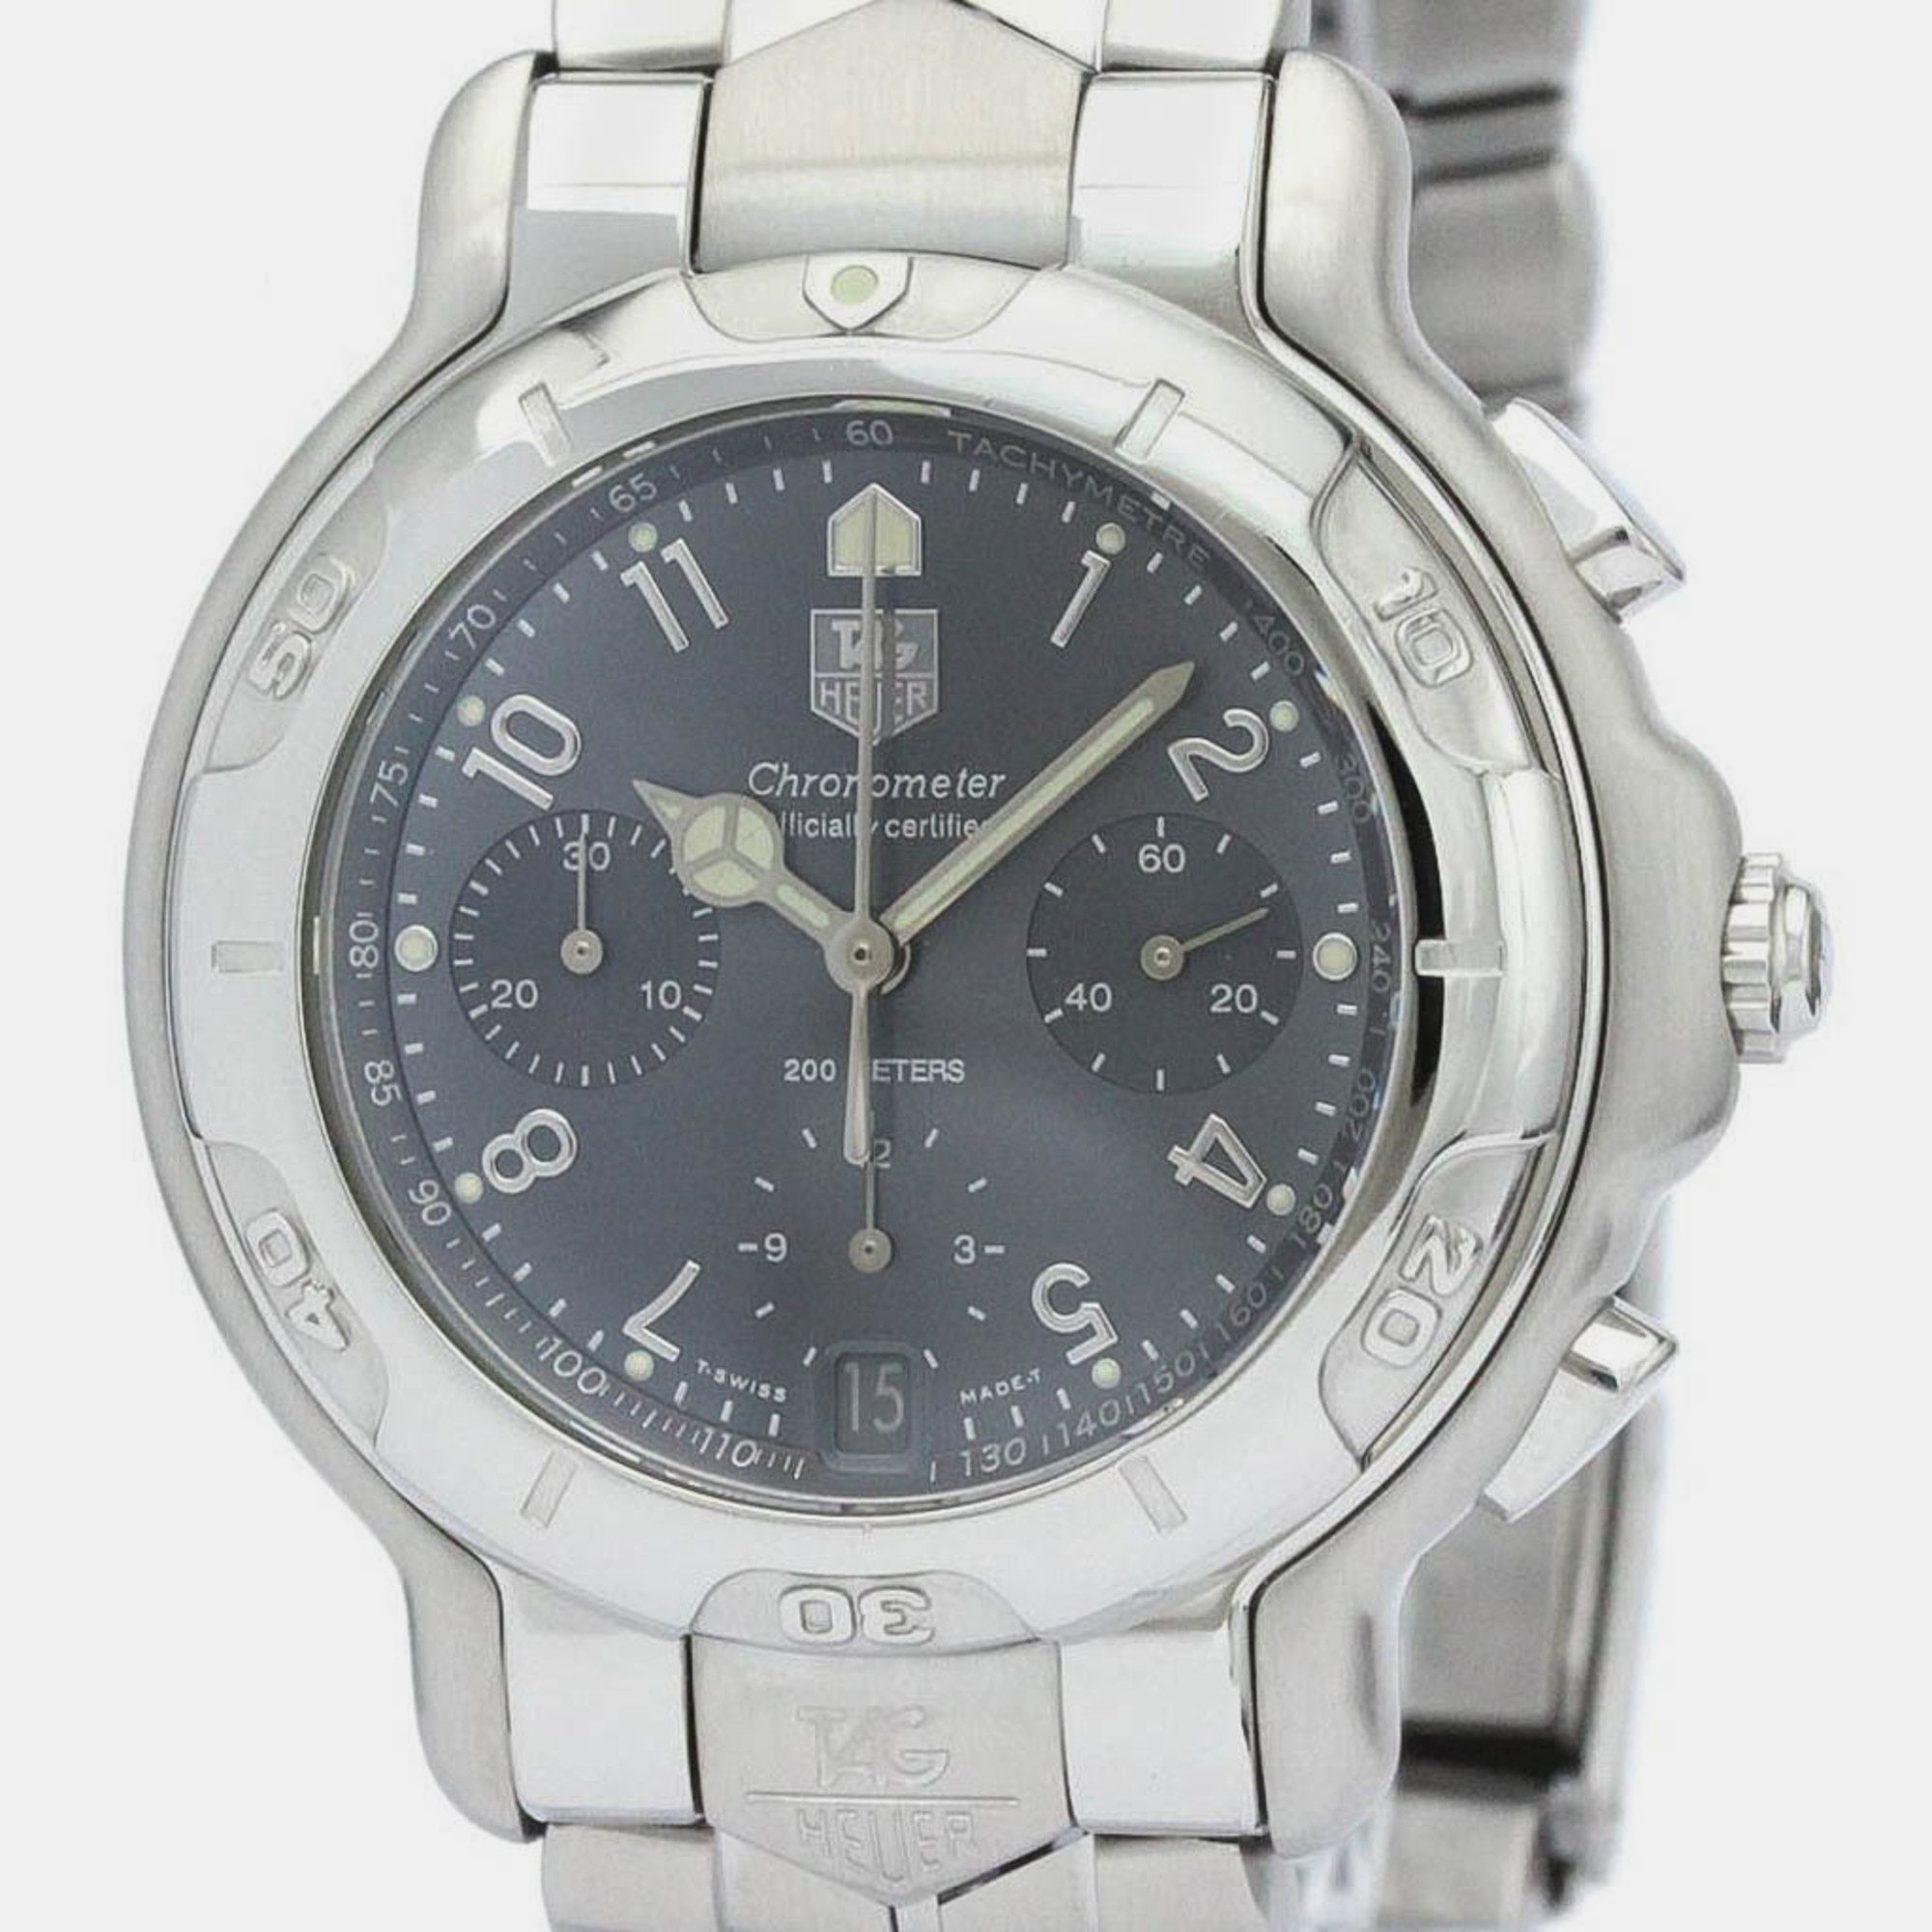 Tag heuer grey stainless steel 6000 series ch5112 automatic men's wristwatch 40 mm